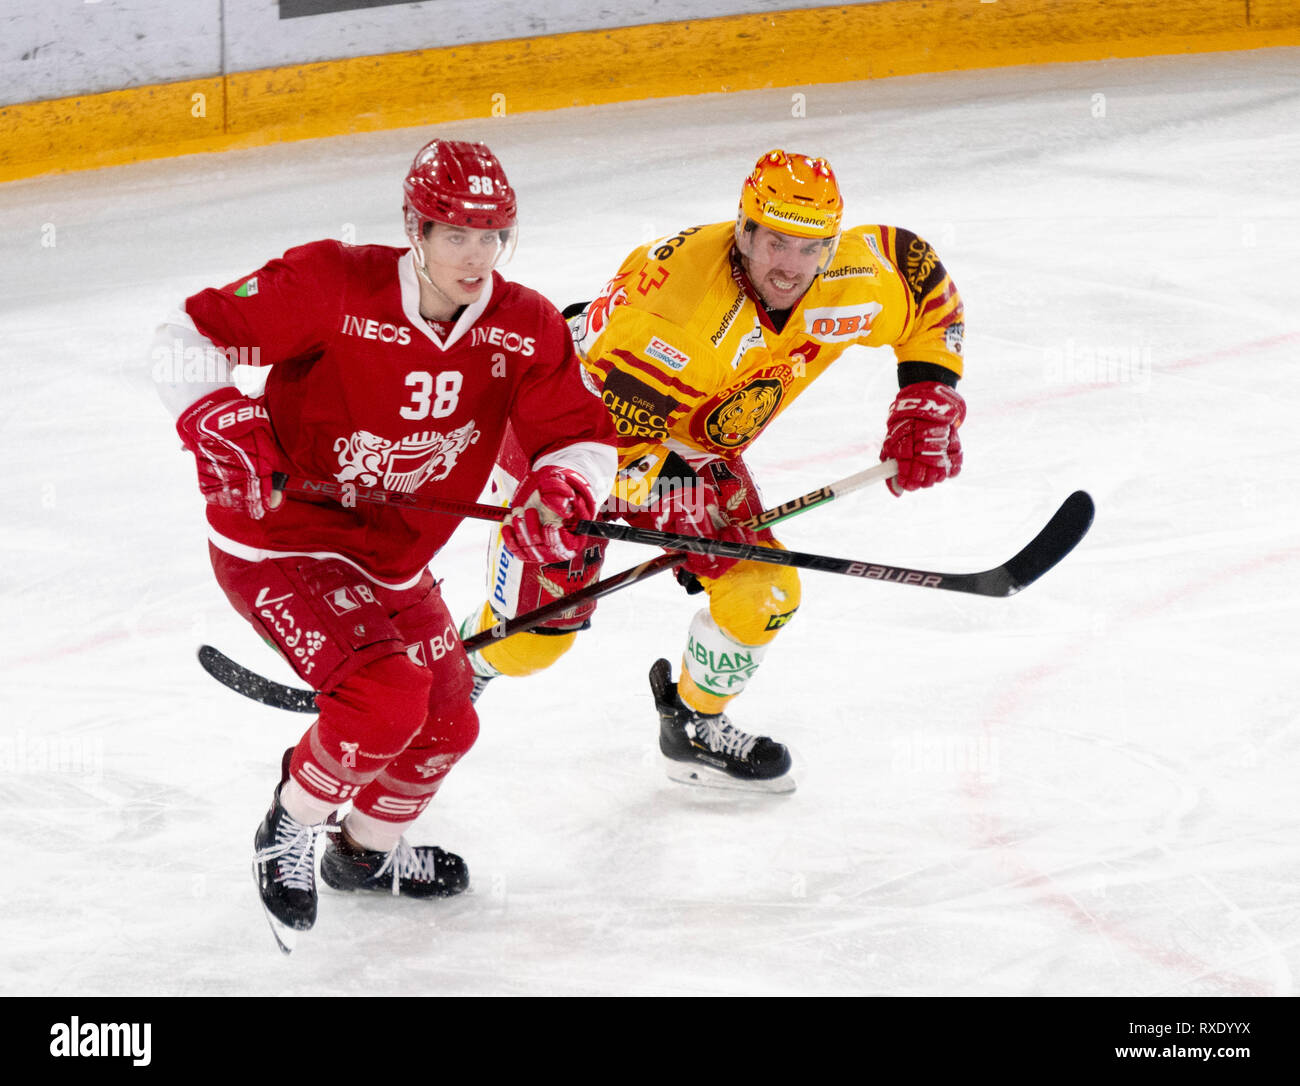 Lausanne, Switzerland. 9th march, 2019. LNA SWISS ICE HOCKEY LAUSANNE HC VS SCL TIGERS- Lausanne Hc Vs HC SCL Tigers at Vaudoise Arena, Lausanne (Play-offs,  Quarter Finals Act I), 09-03-2019. Credit: Eric Dubost/Alamy Live News Stock Photo